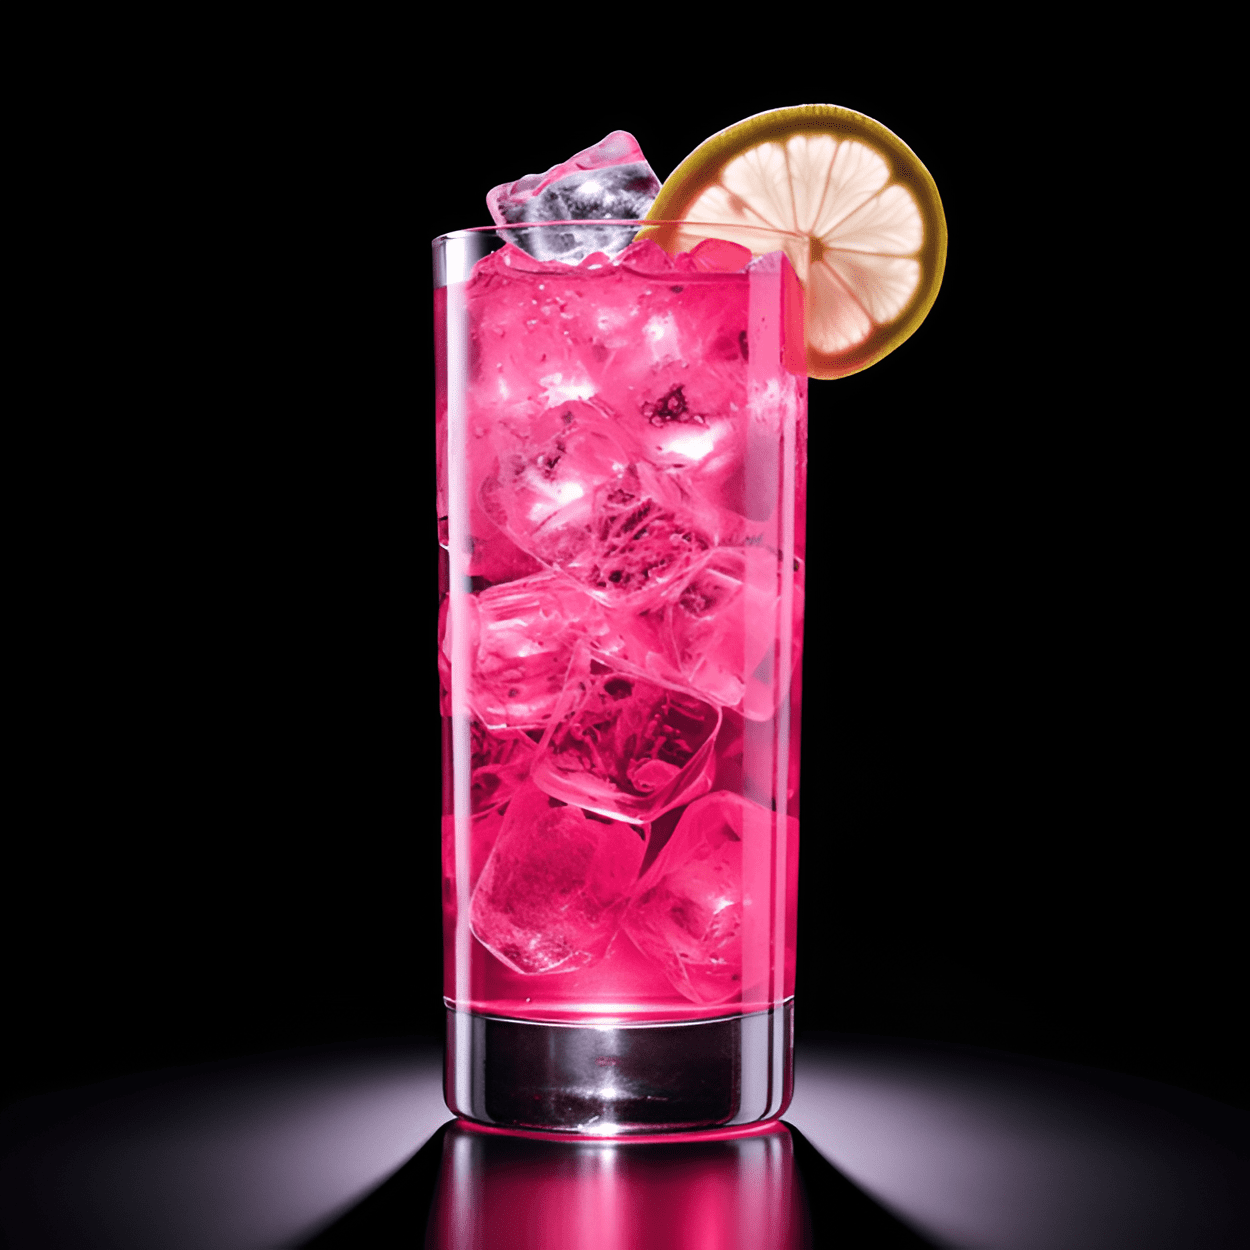 Pink Whitney Cocktail Recipe - The Pink Whitney is a delightfully sweet cocktail with a tart undertone. The pink lemonade gives it a refreshing citrusy flavor, while the vodka adds a smooth, strong kick. It's a well-balanced drink that's both sweet and sour, with a vibrant, fruity taste that lingers on the palate.